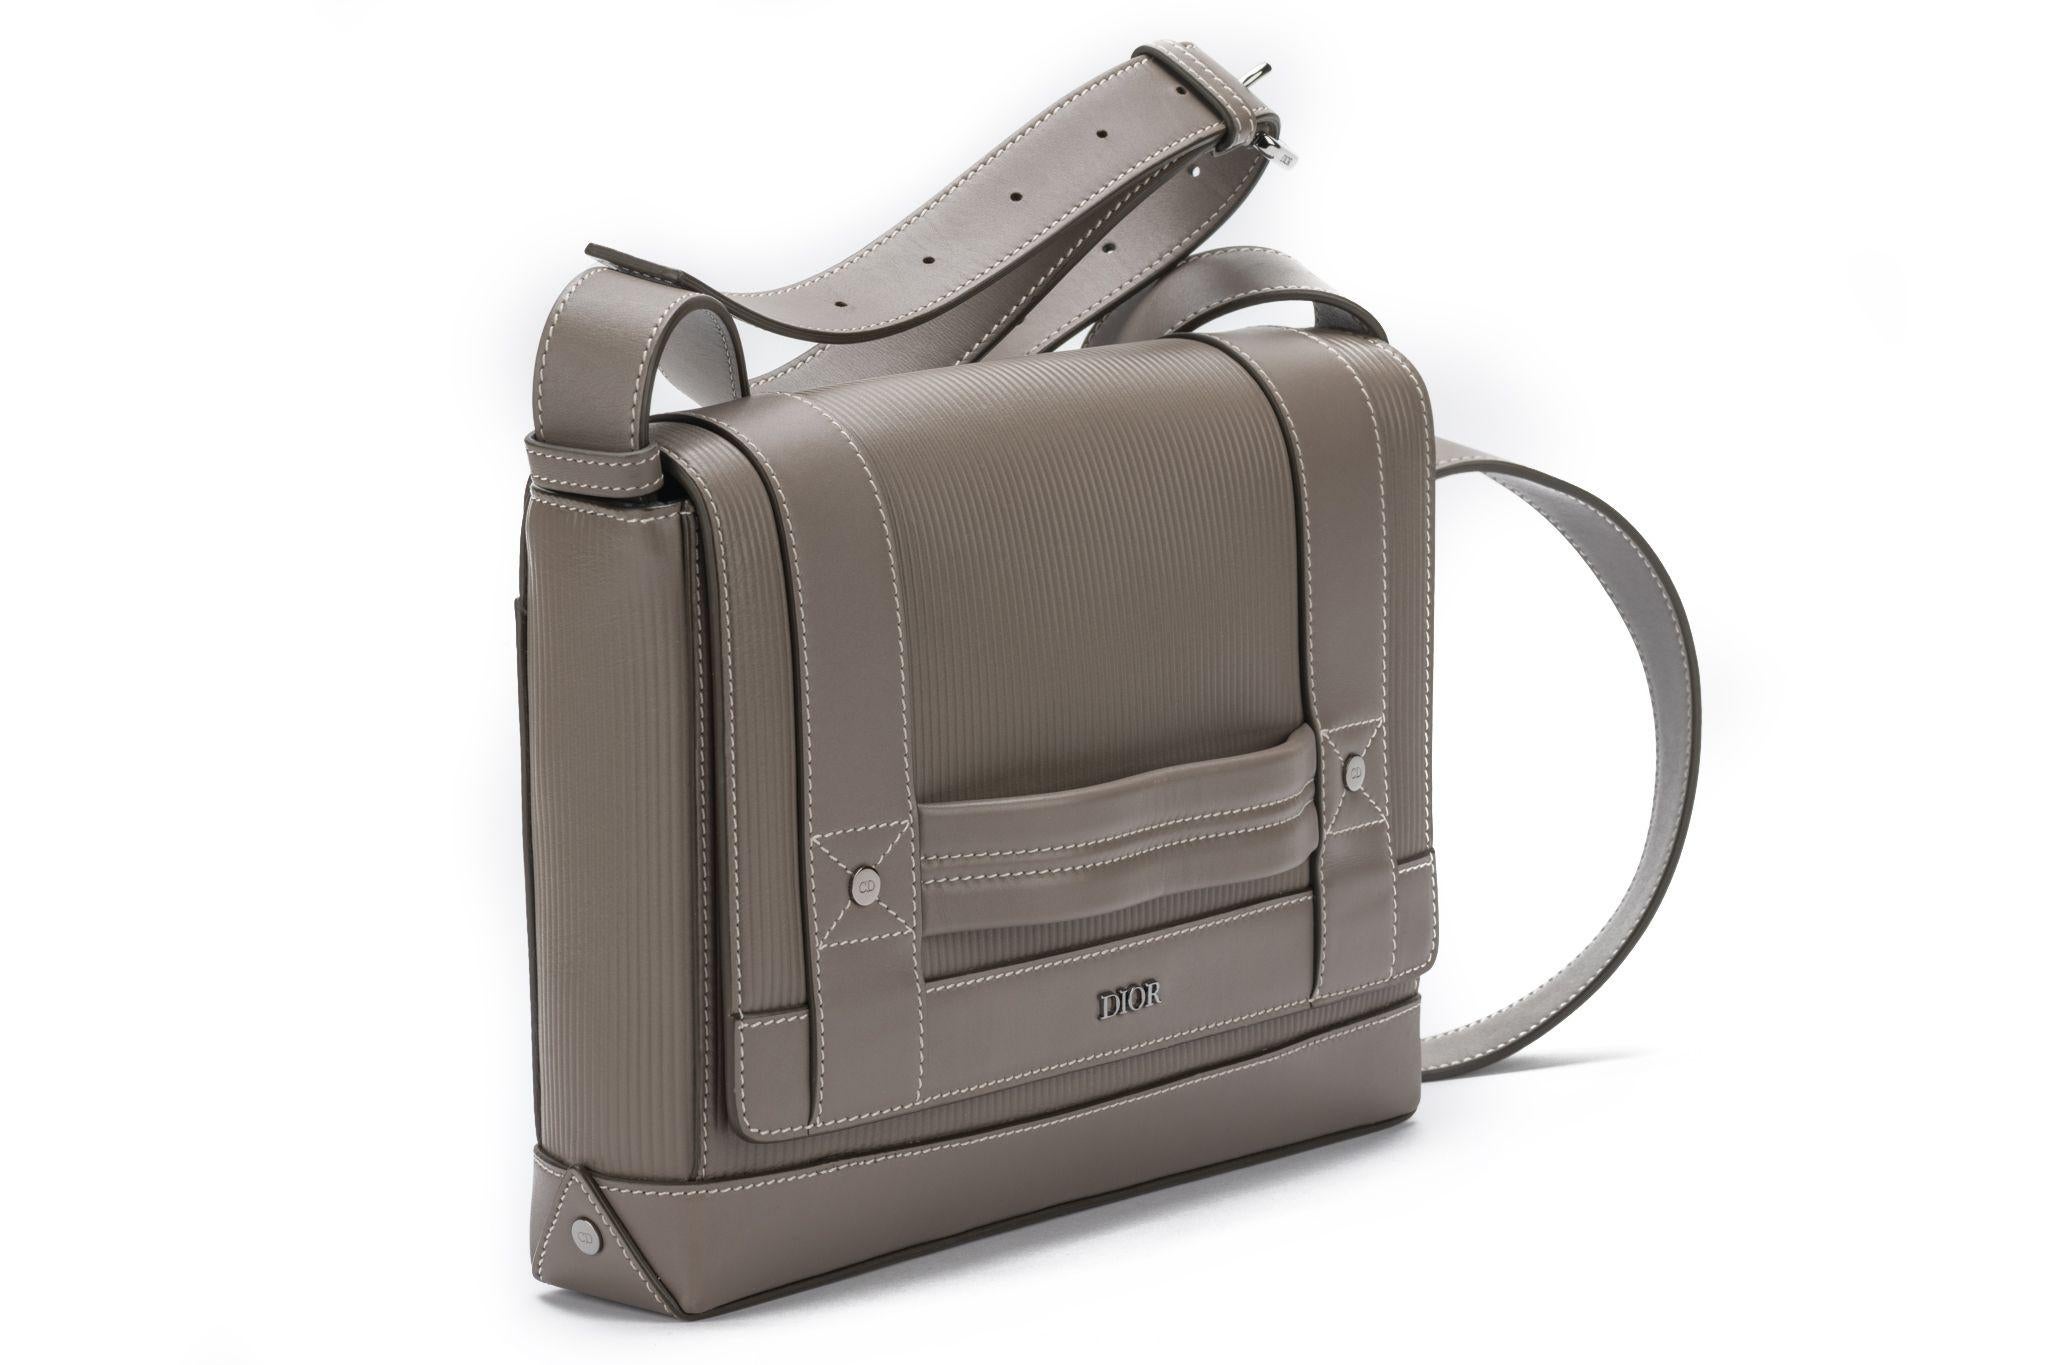 Dior messenger bag in light grey made of leather. Comes with a adjustable shoulder strap measures 20” and original dustcover.